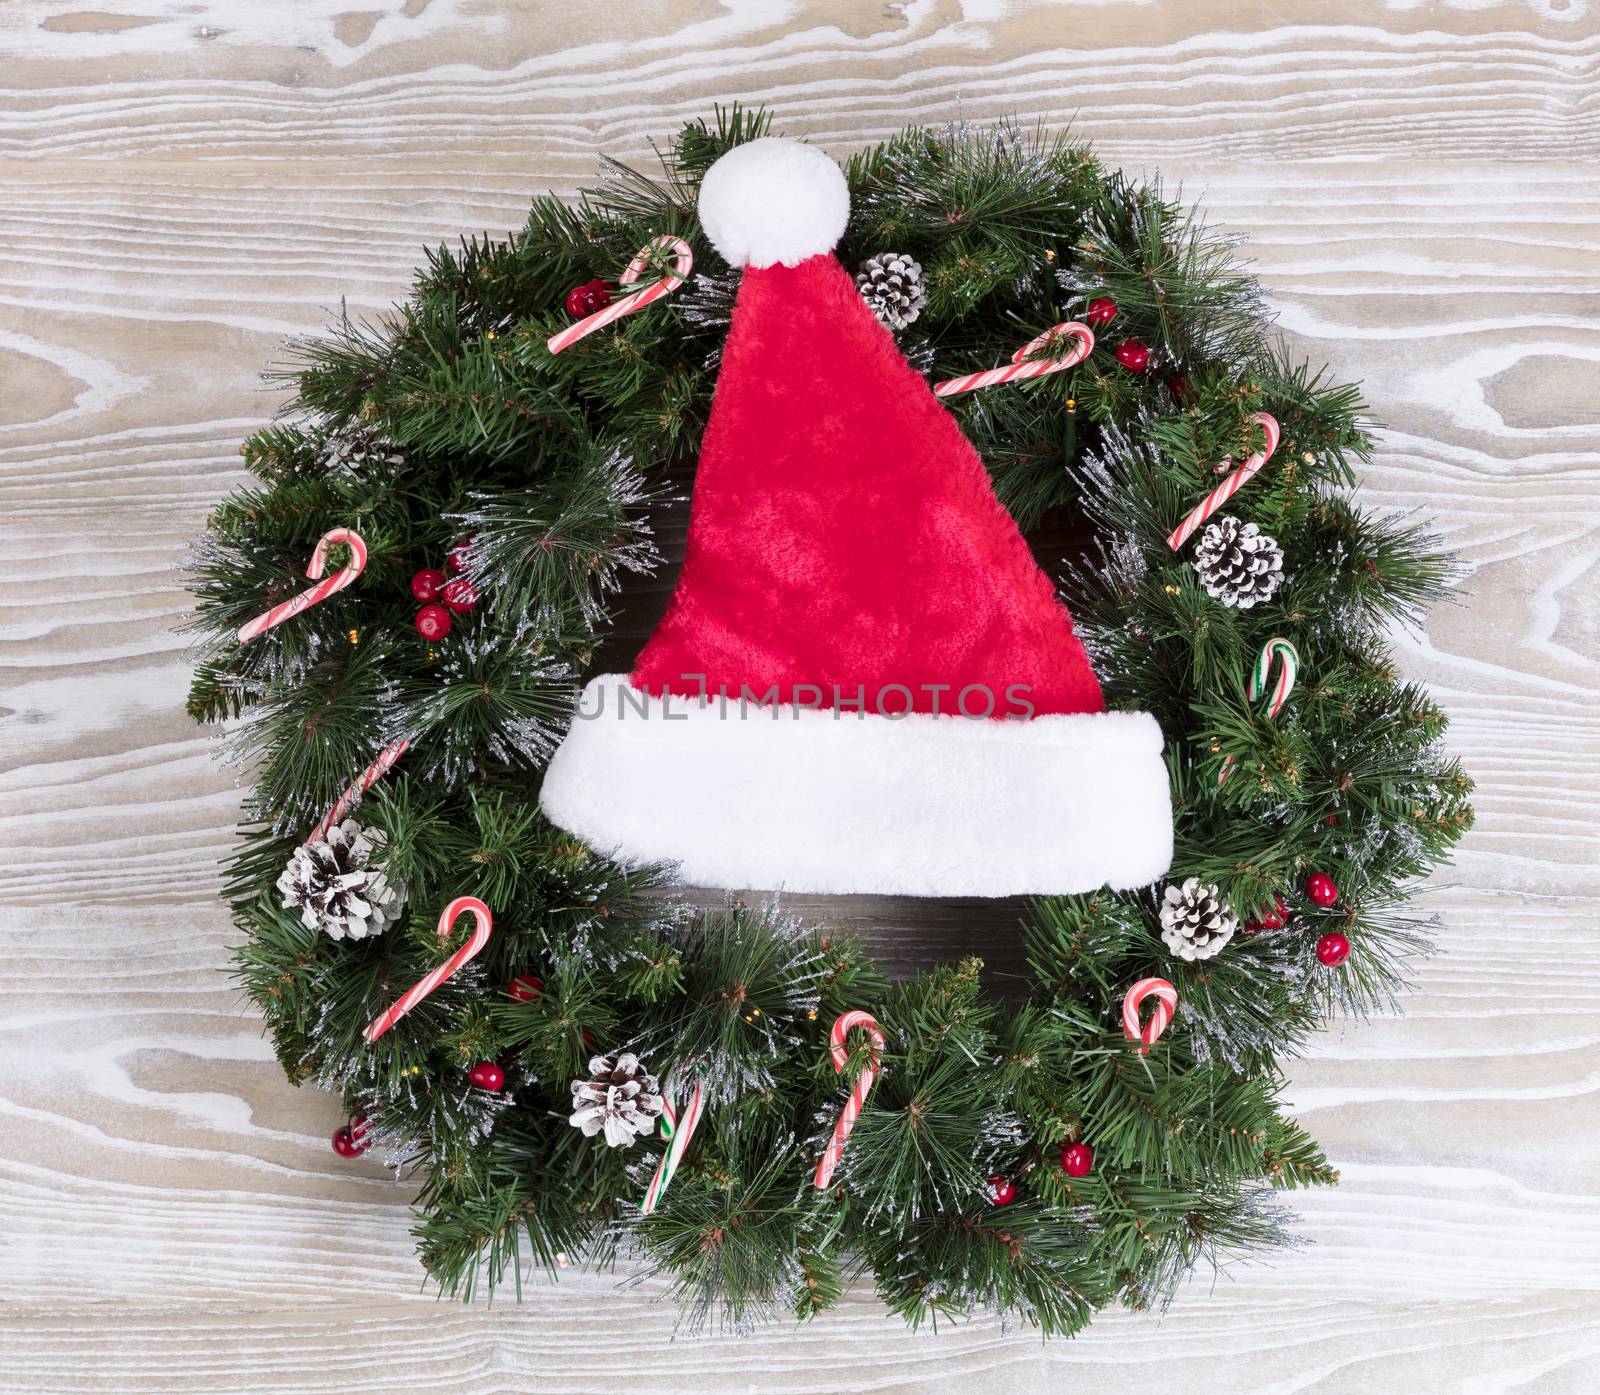 Evergreen Christmas wreath with Santa cap, lights, pine cones and candy canes on white wood. 